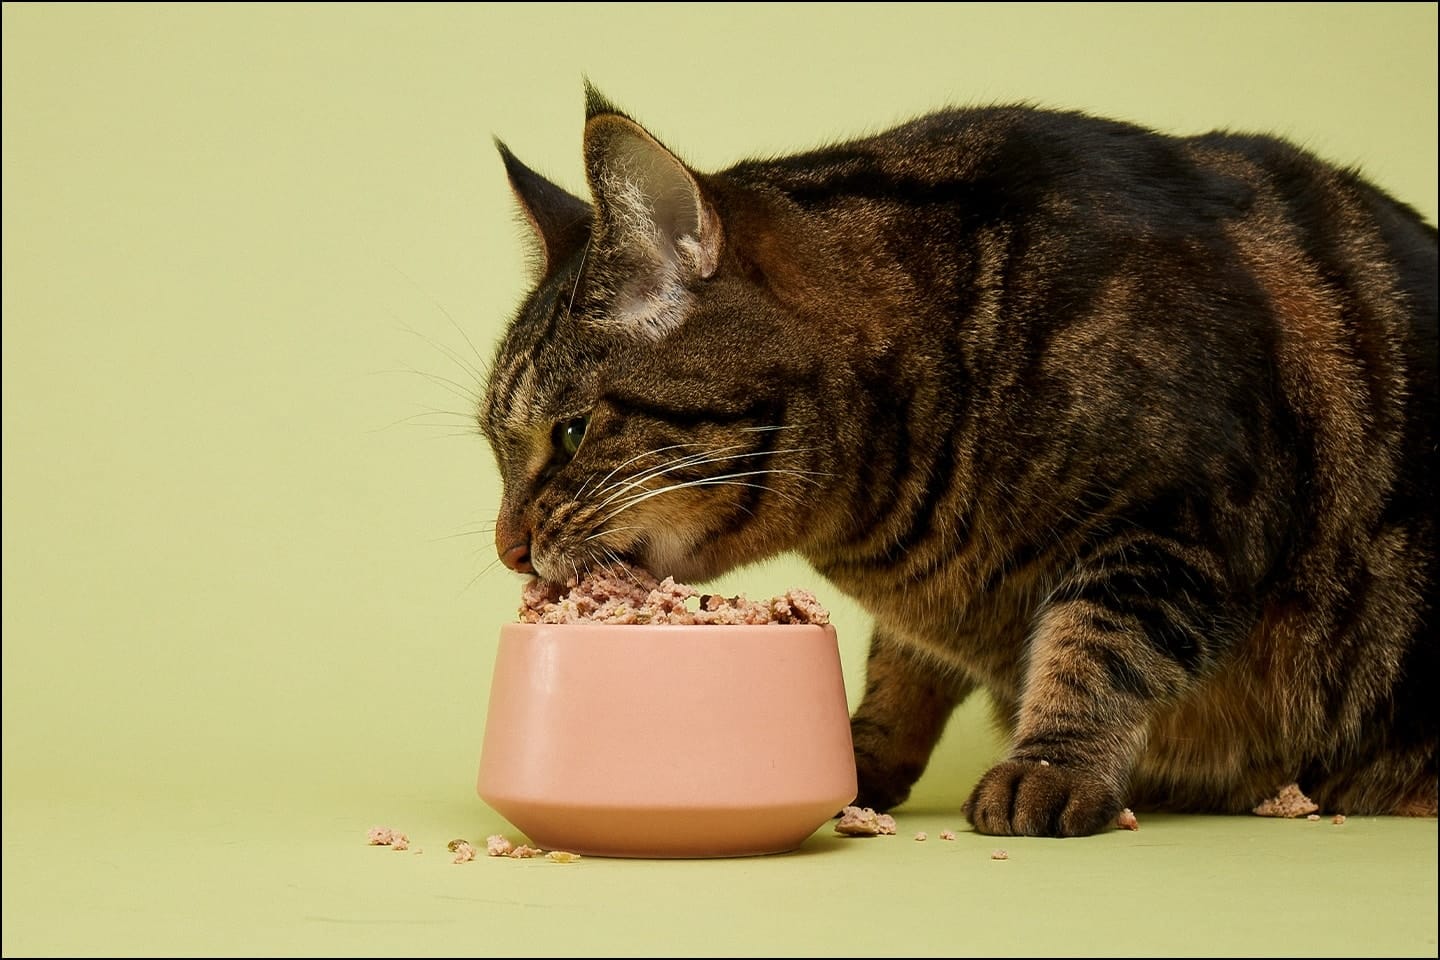 cat eating smalls freeze-dried raw food